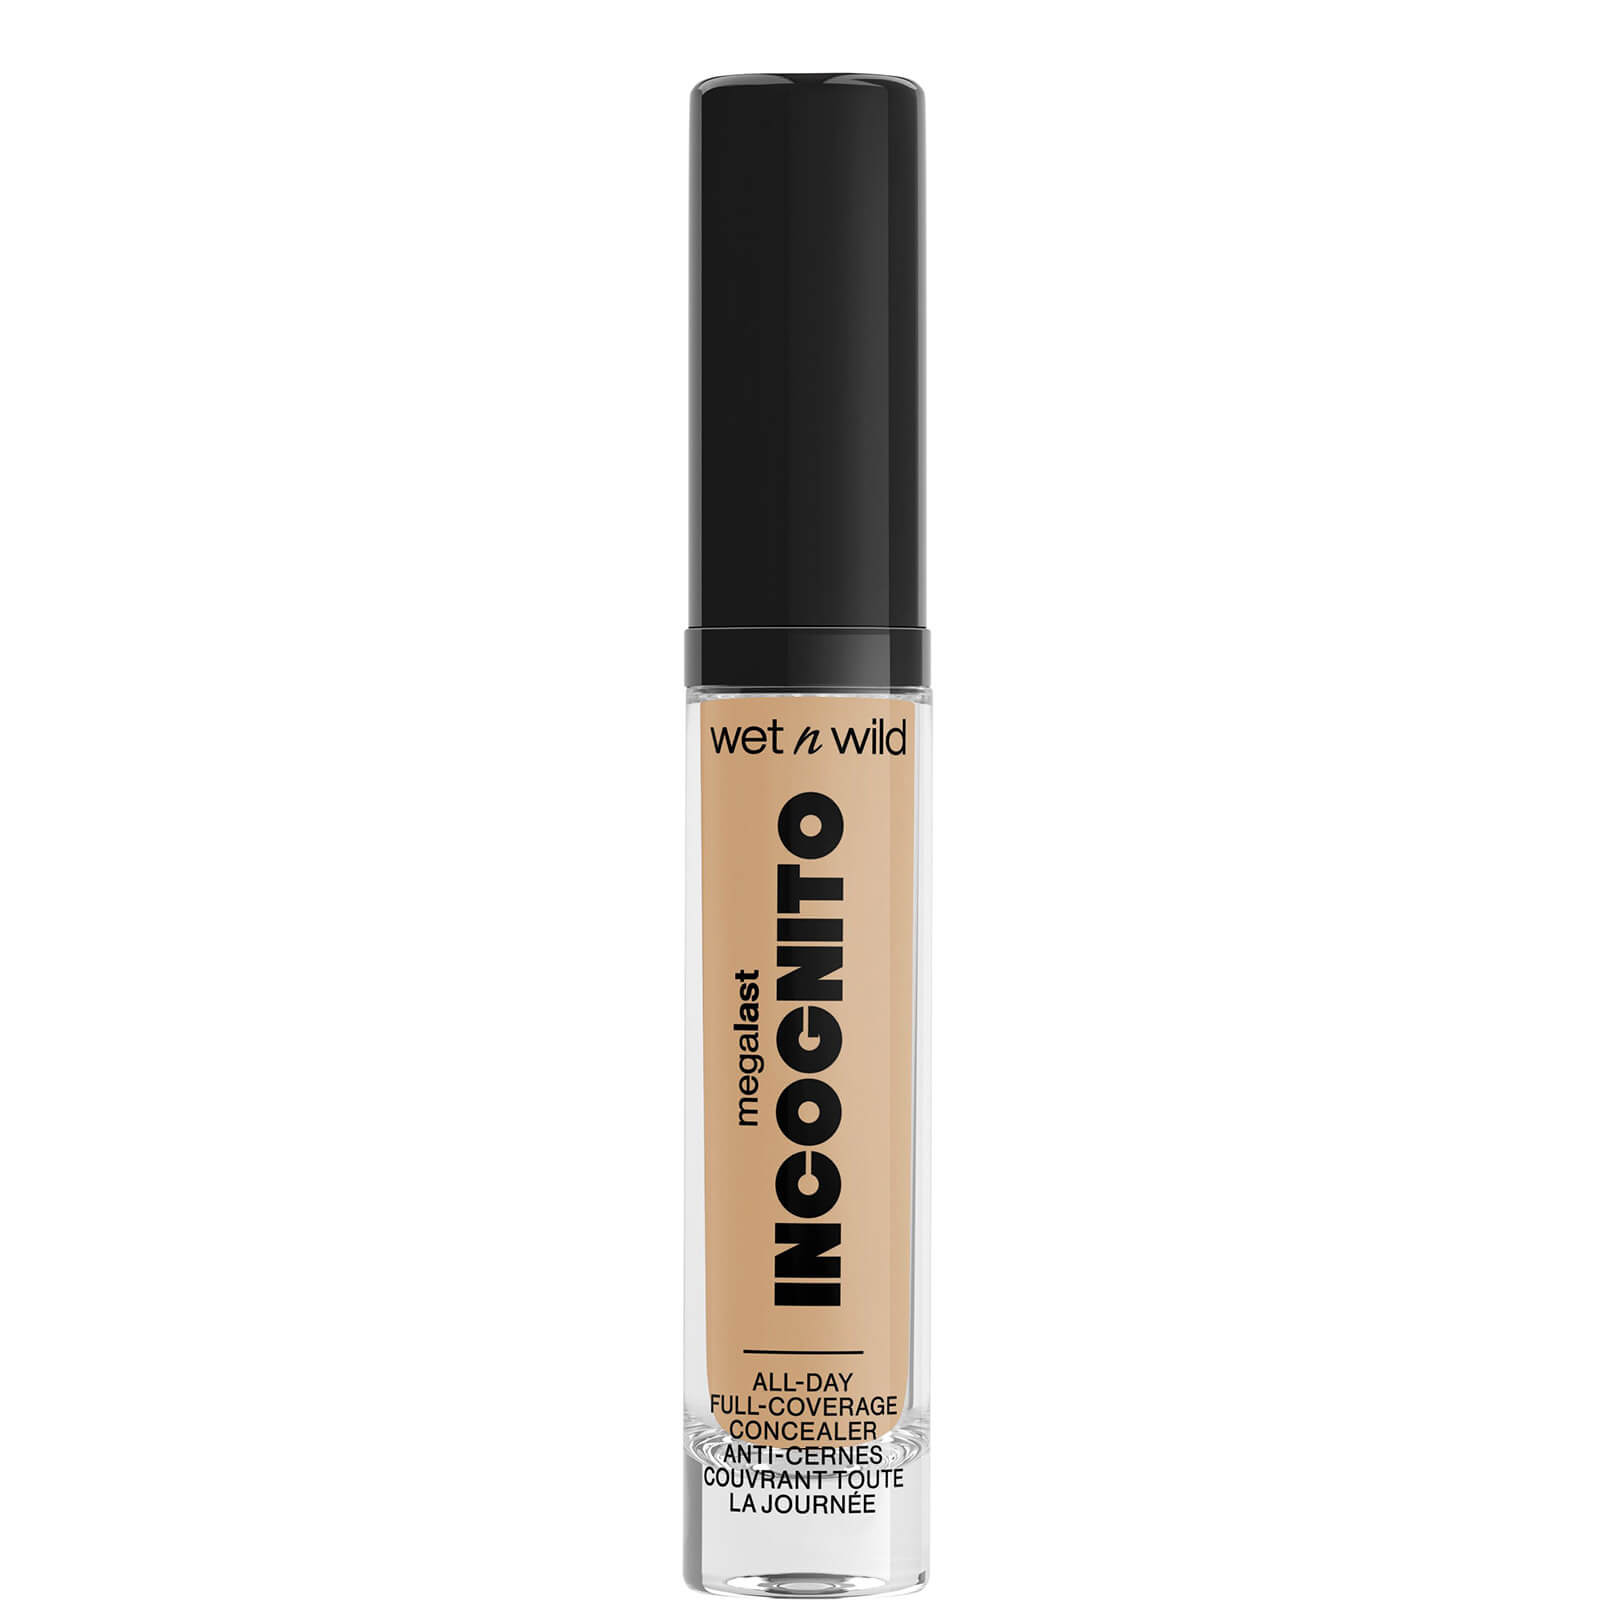 Wet N Wild Megalast Incognito Full-coverage Concealer 5.5ml (various Shades) - Medium Honey